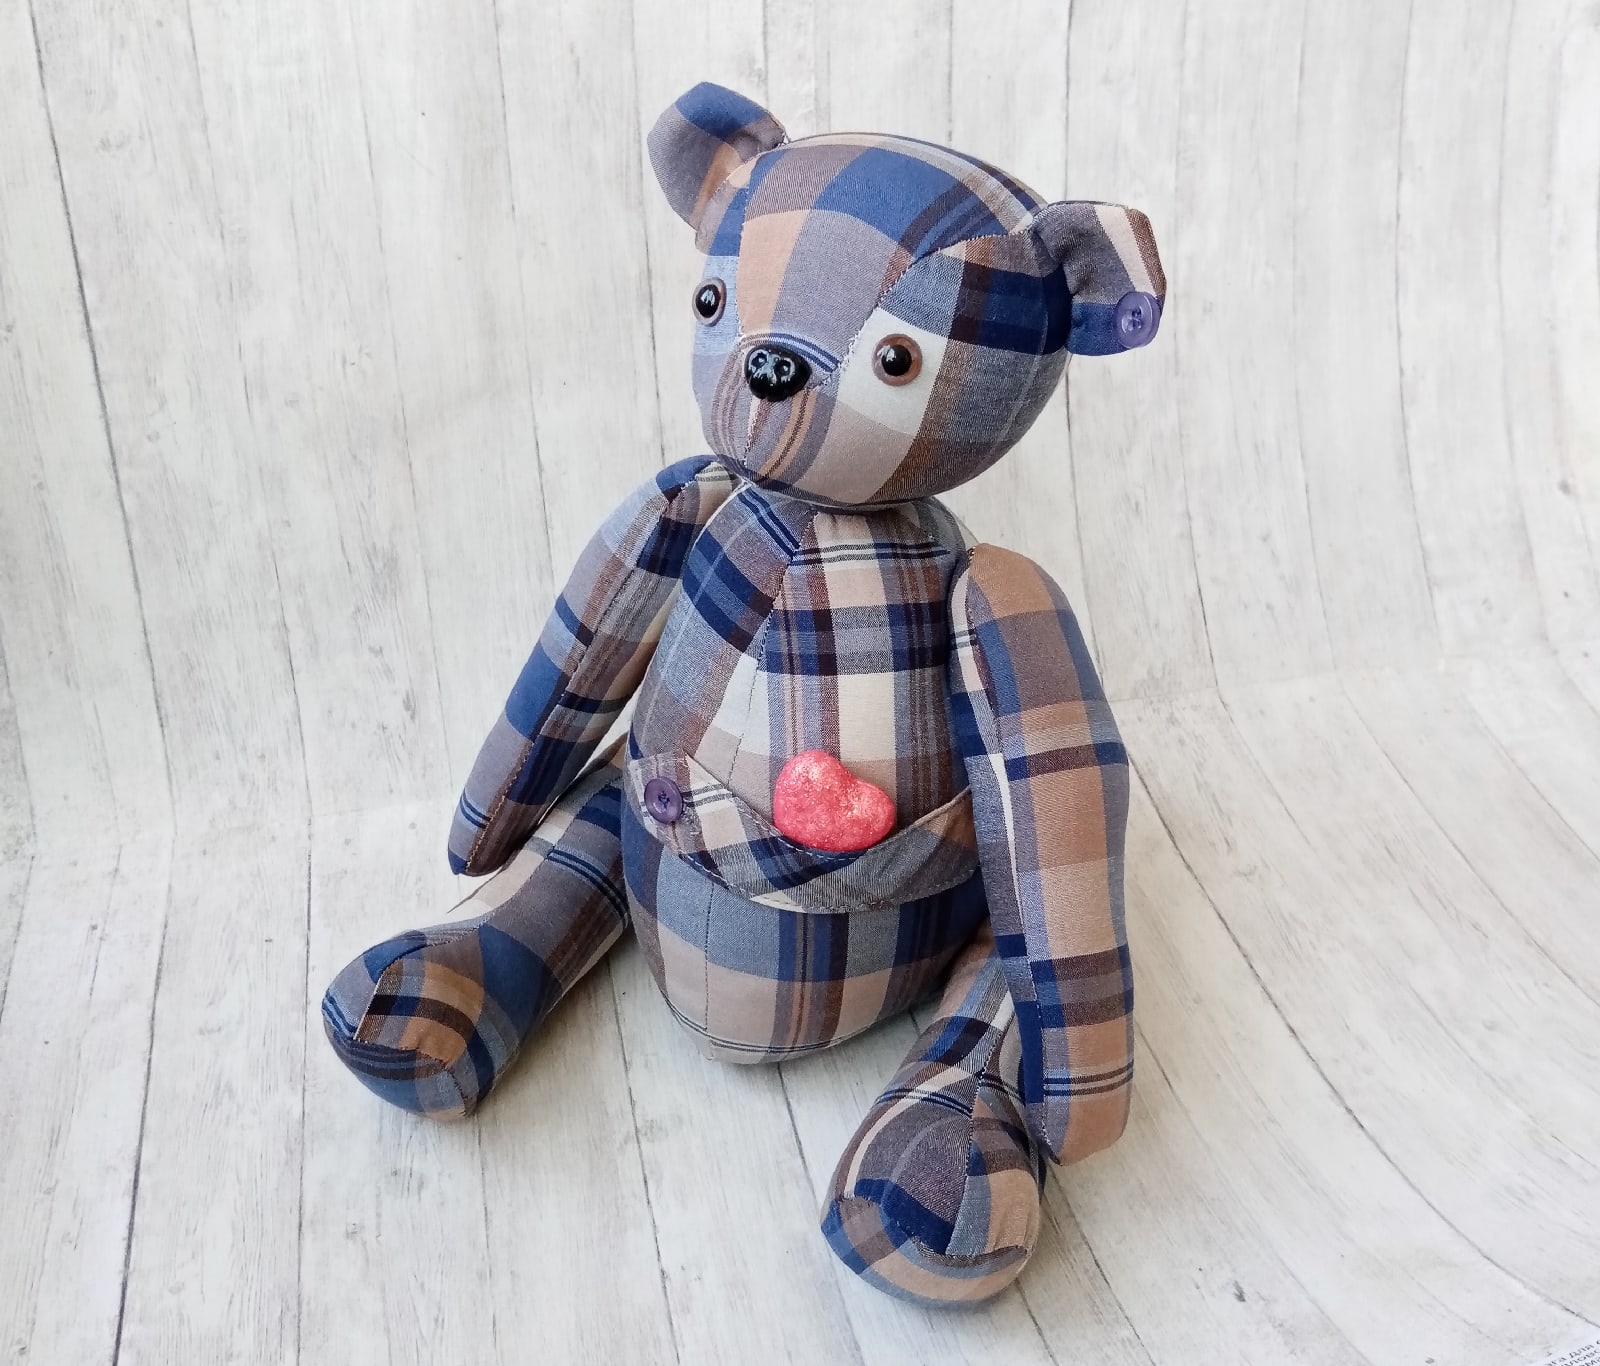 Inspiration: Make a memory bear to honor a loved one – Sewing